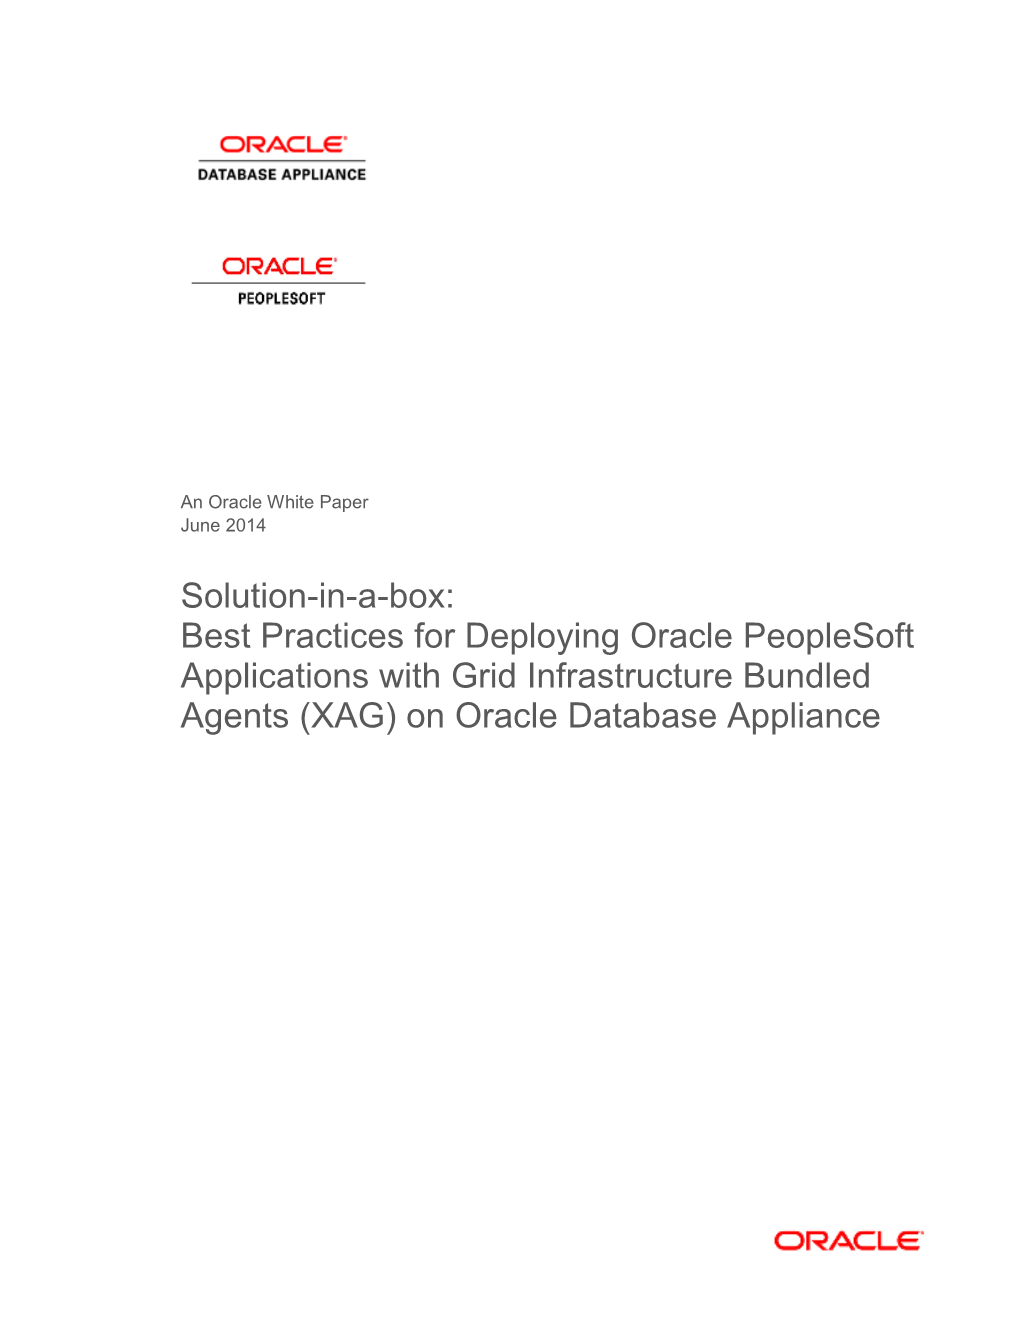 Peoplesoft on ODA With